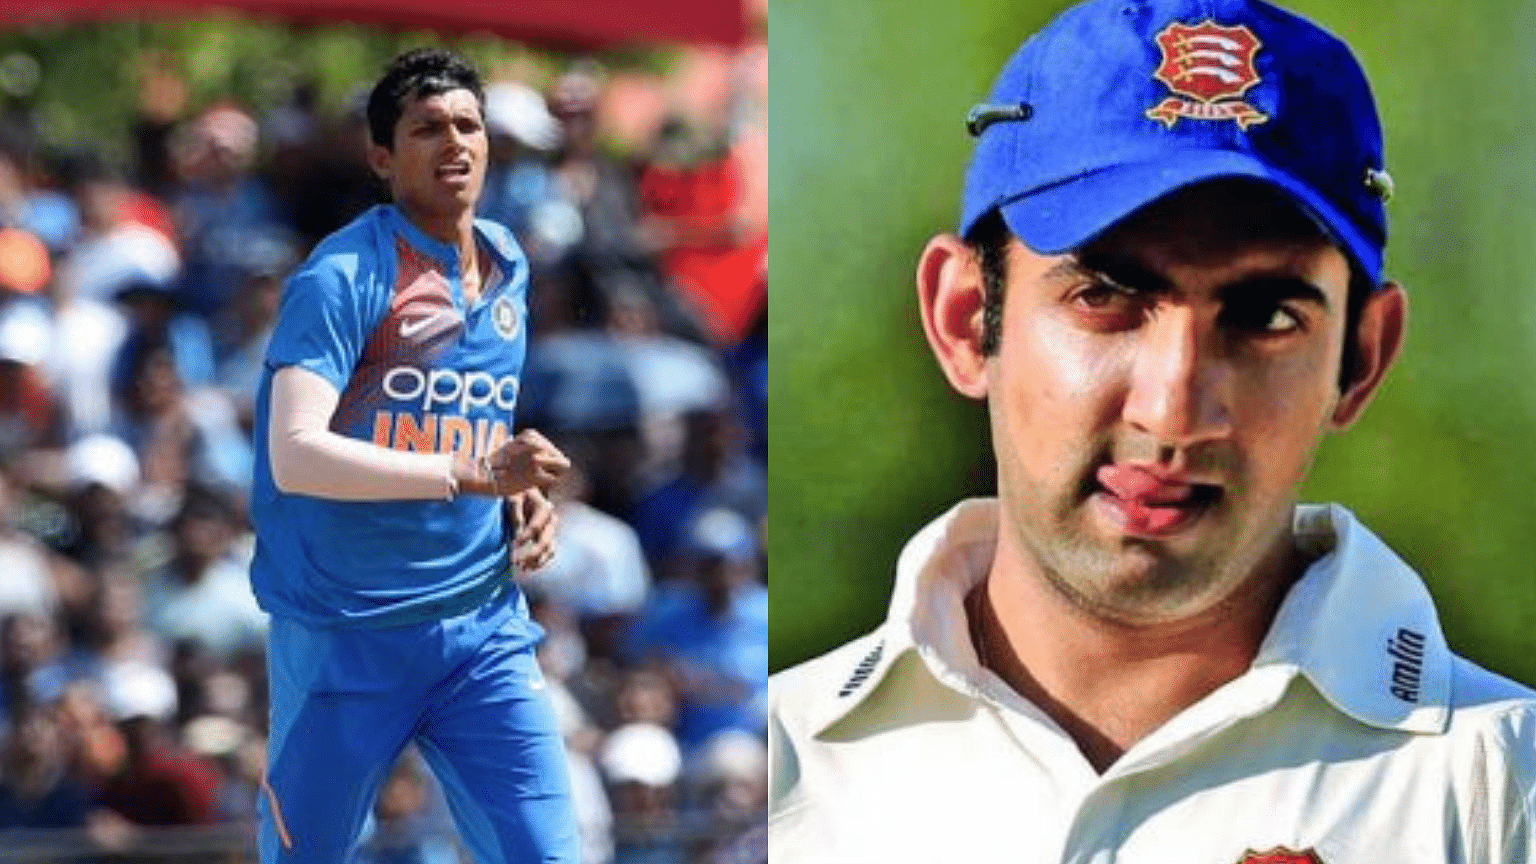 It was Gautam Gambhir’s support that helped Navdeep Saini rise through the ranks and eventually make his India debut.